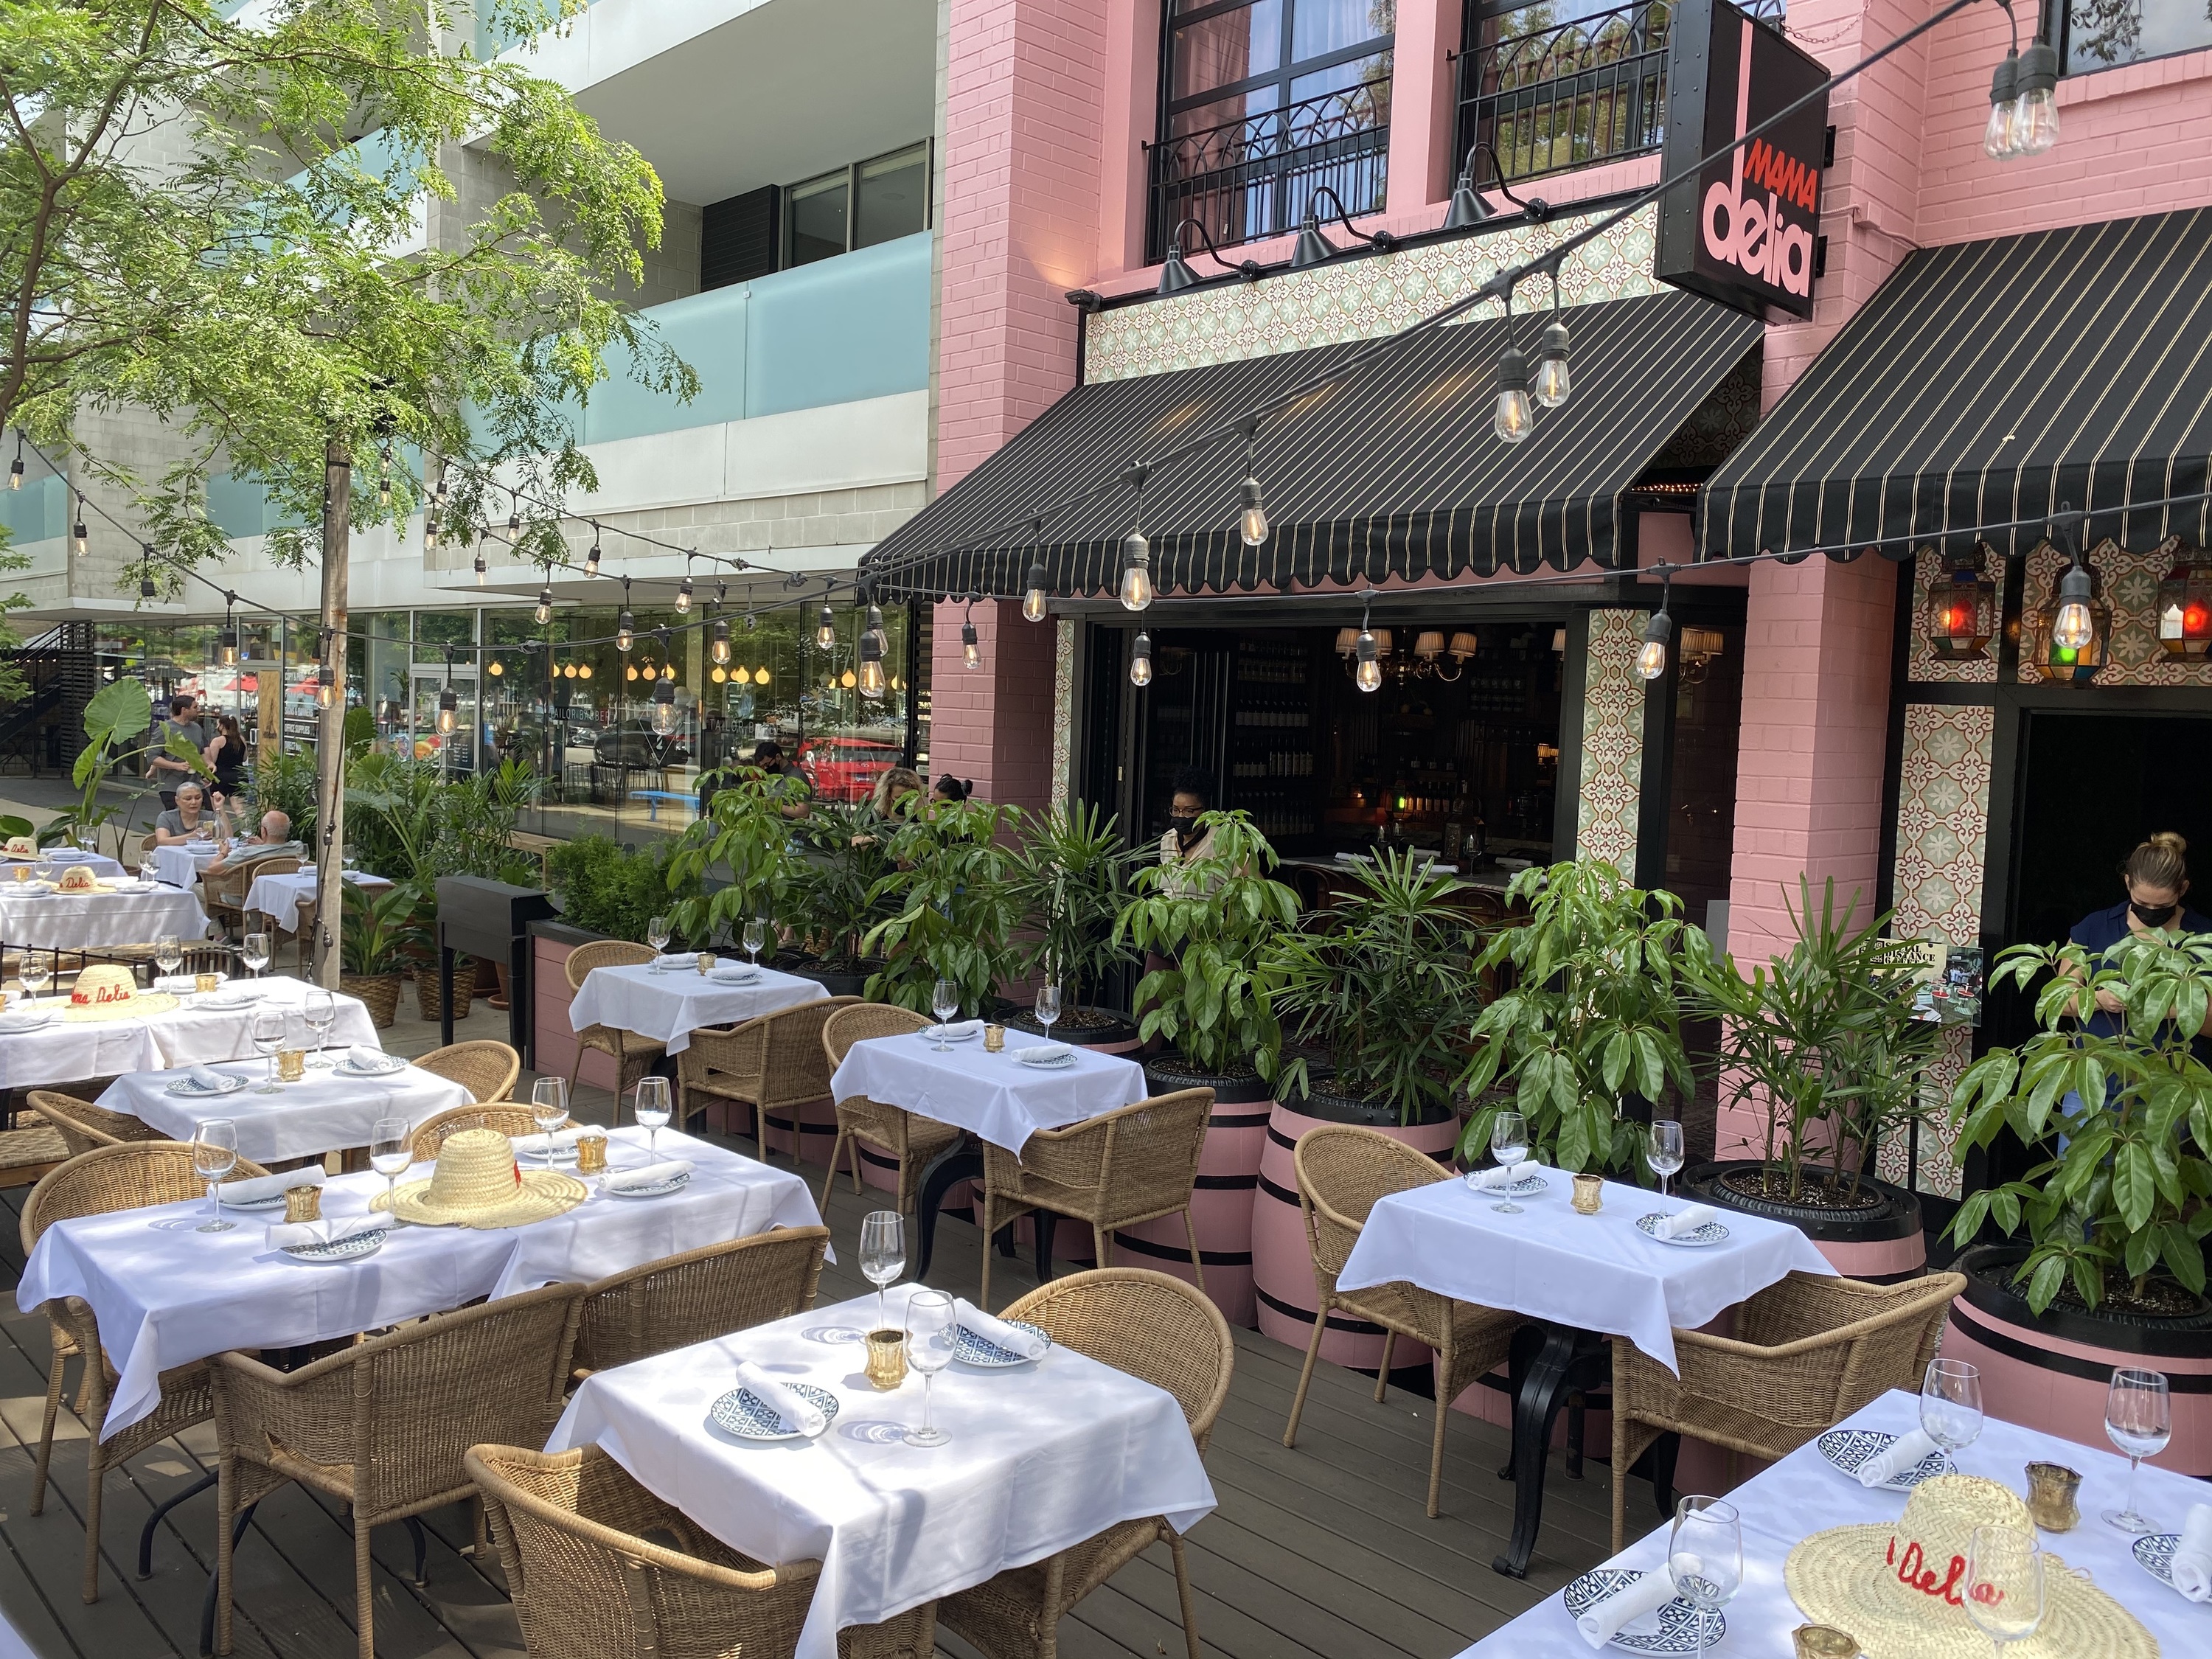 Indian Restaurants With Outdoor Seating Near Me - Outdoor Dining In Los